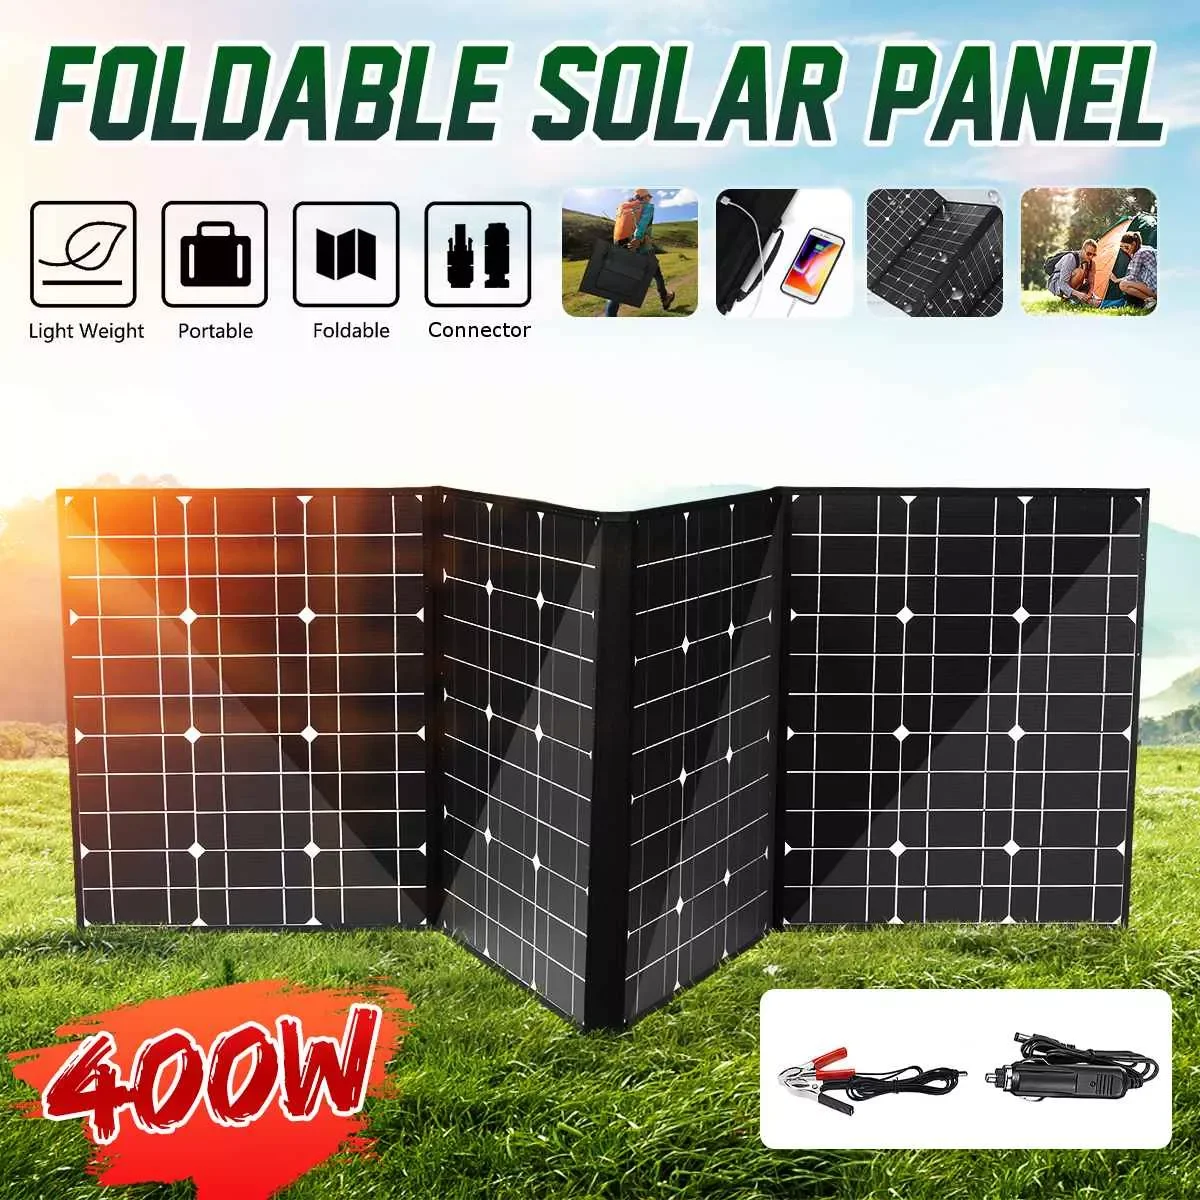 

18V 400W Monocrystallinel Solar Panel Folding Package with 1.5m Cables +USB Interface Set for Outdoor Working